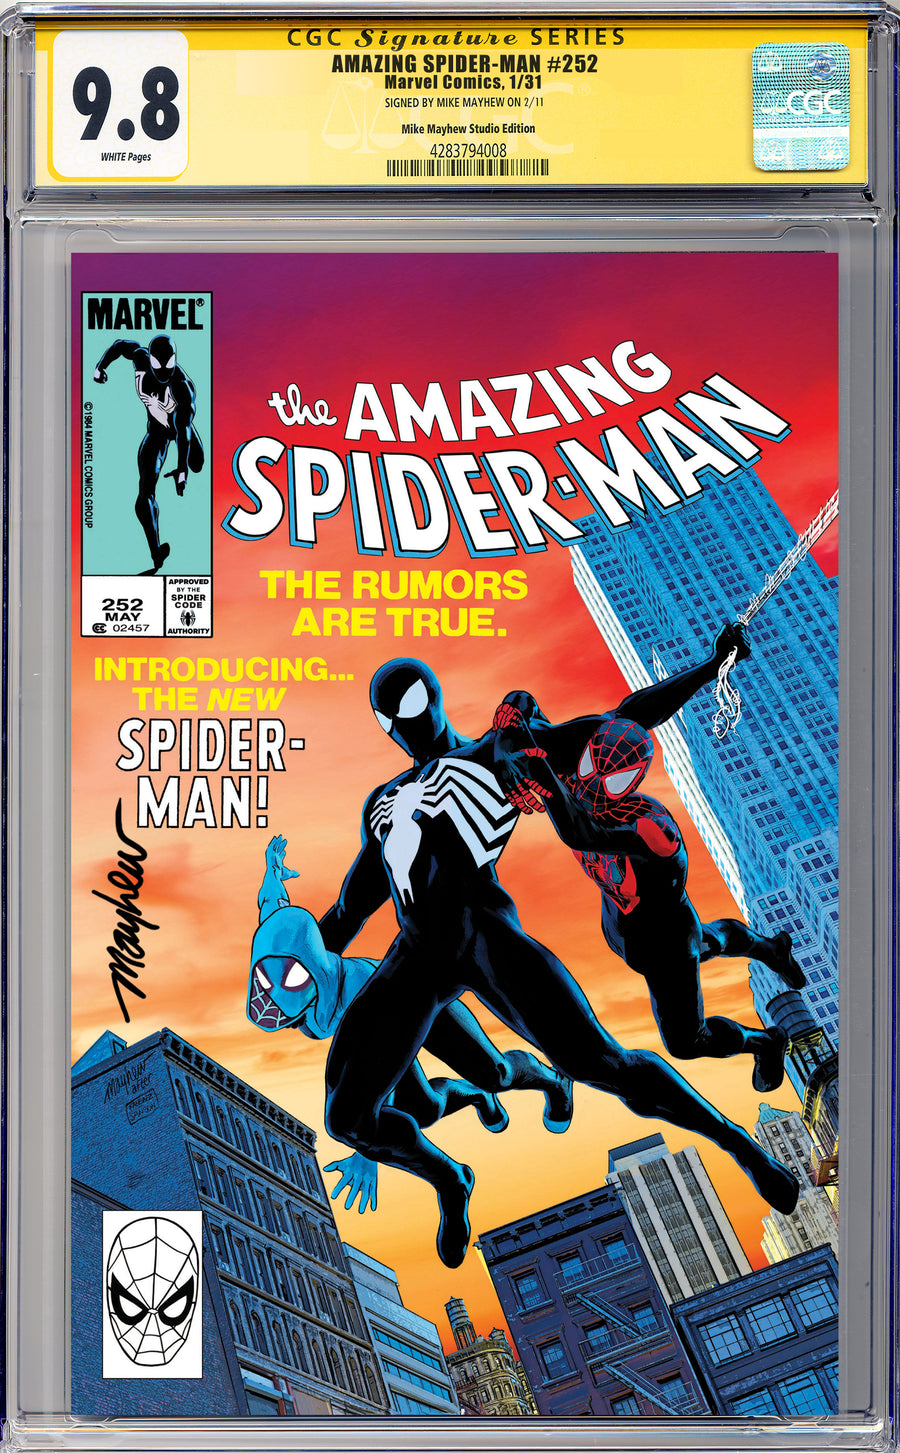 AMAZING SPIDER-MAN #252 FACSIMILE EDITION Mike Mayhew Studio Variant Cover A Trade Dress Regular Sig CGC Yellow Label 9.6 and Above Graded Slab